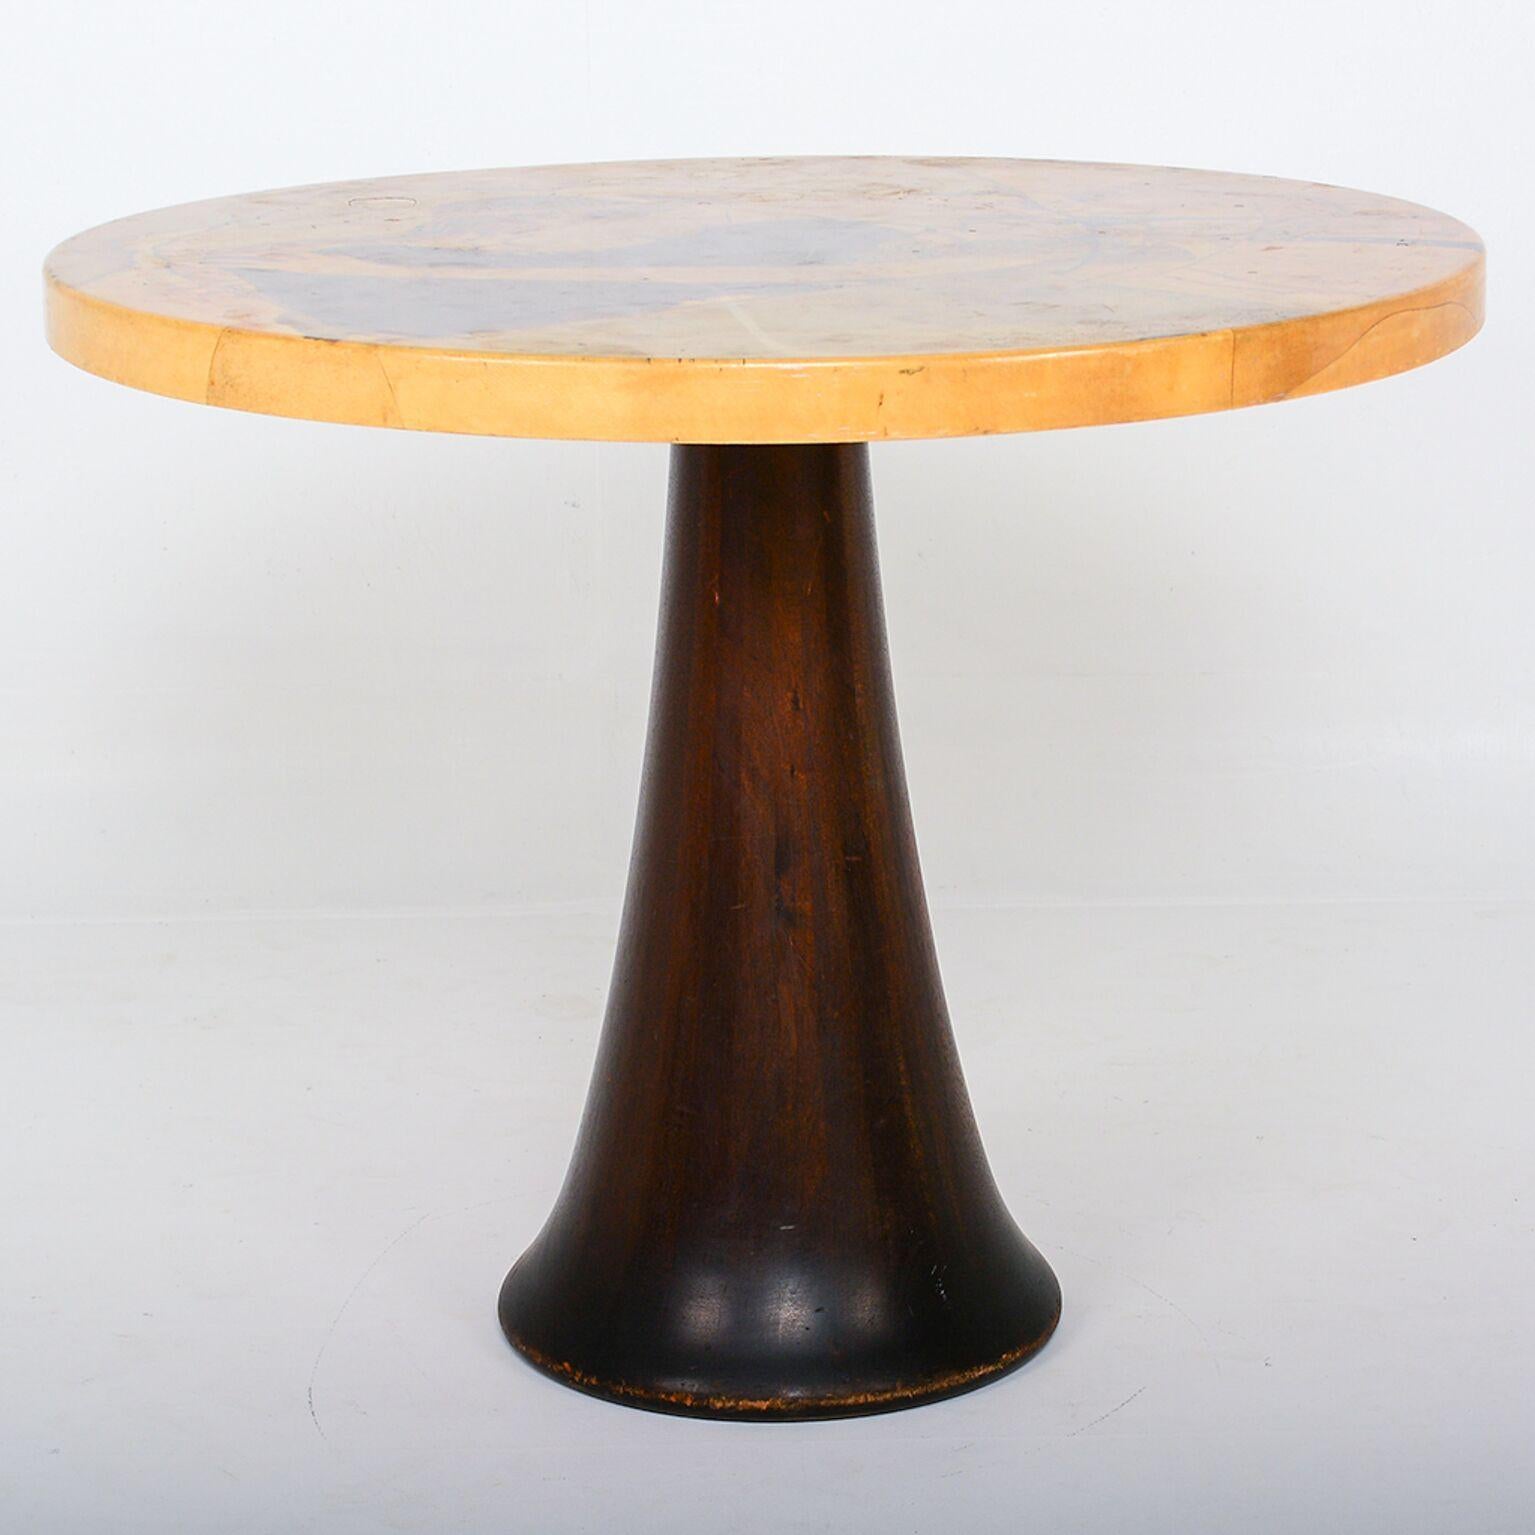 We are pleased to offer: a unique and elegant gueridon table. Designed and manufactured by Maria Teresa Mendez, in Mexico, circa 1960s. Beautiful quality, the goatskin is wrapped in the round wood top and hand painted. Signed with the artist